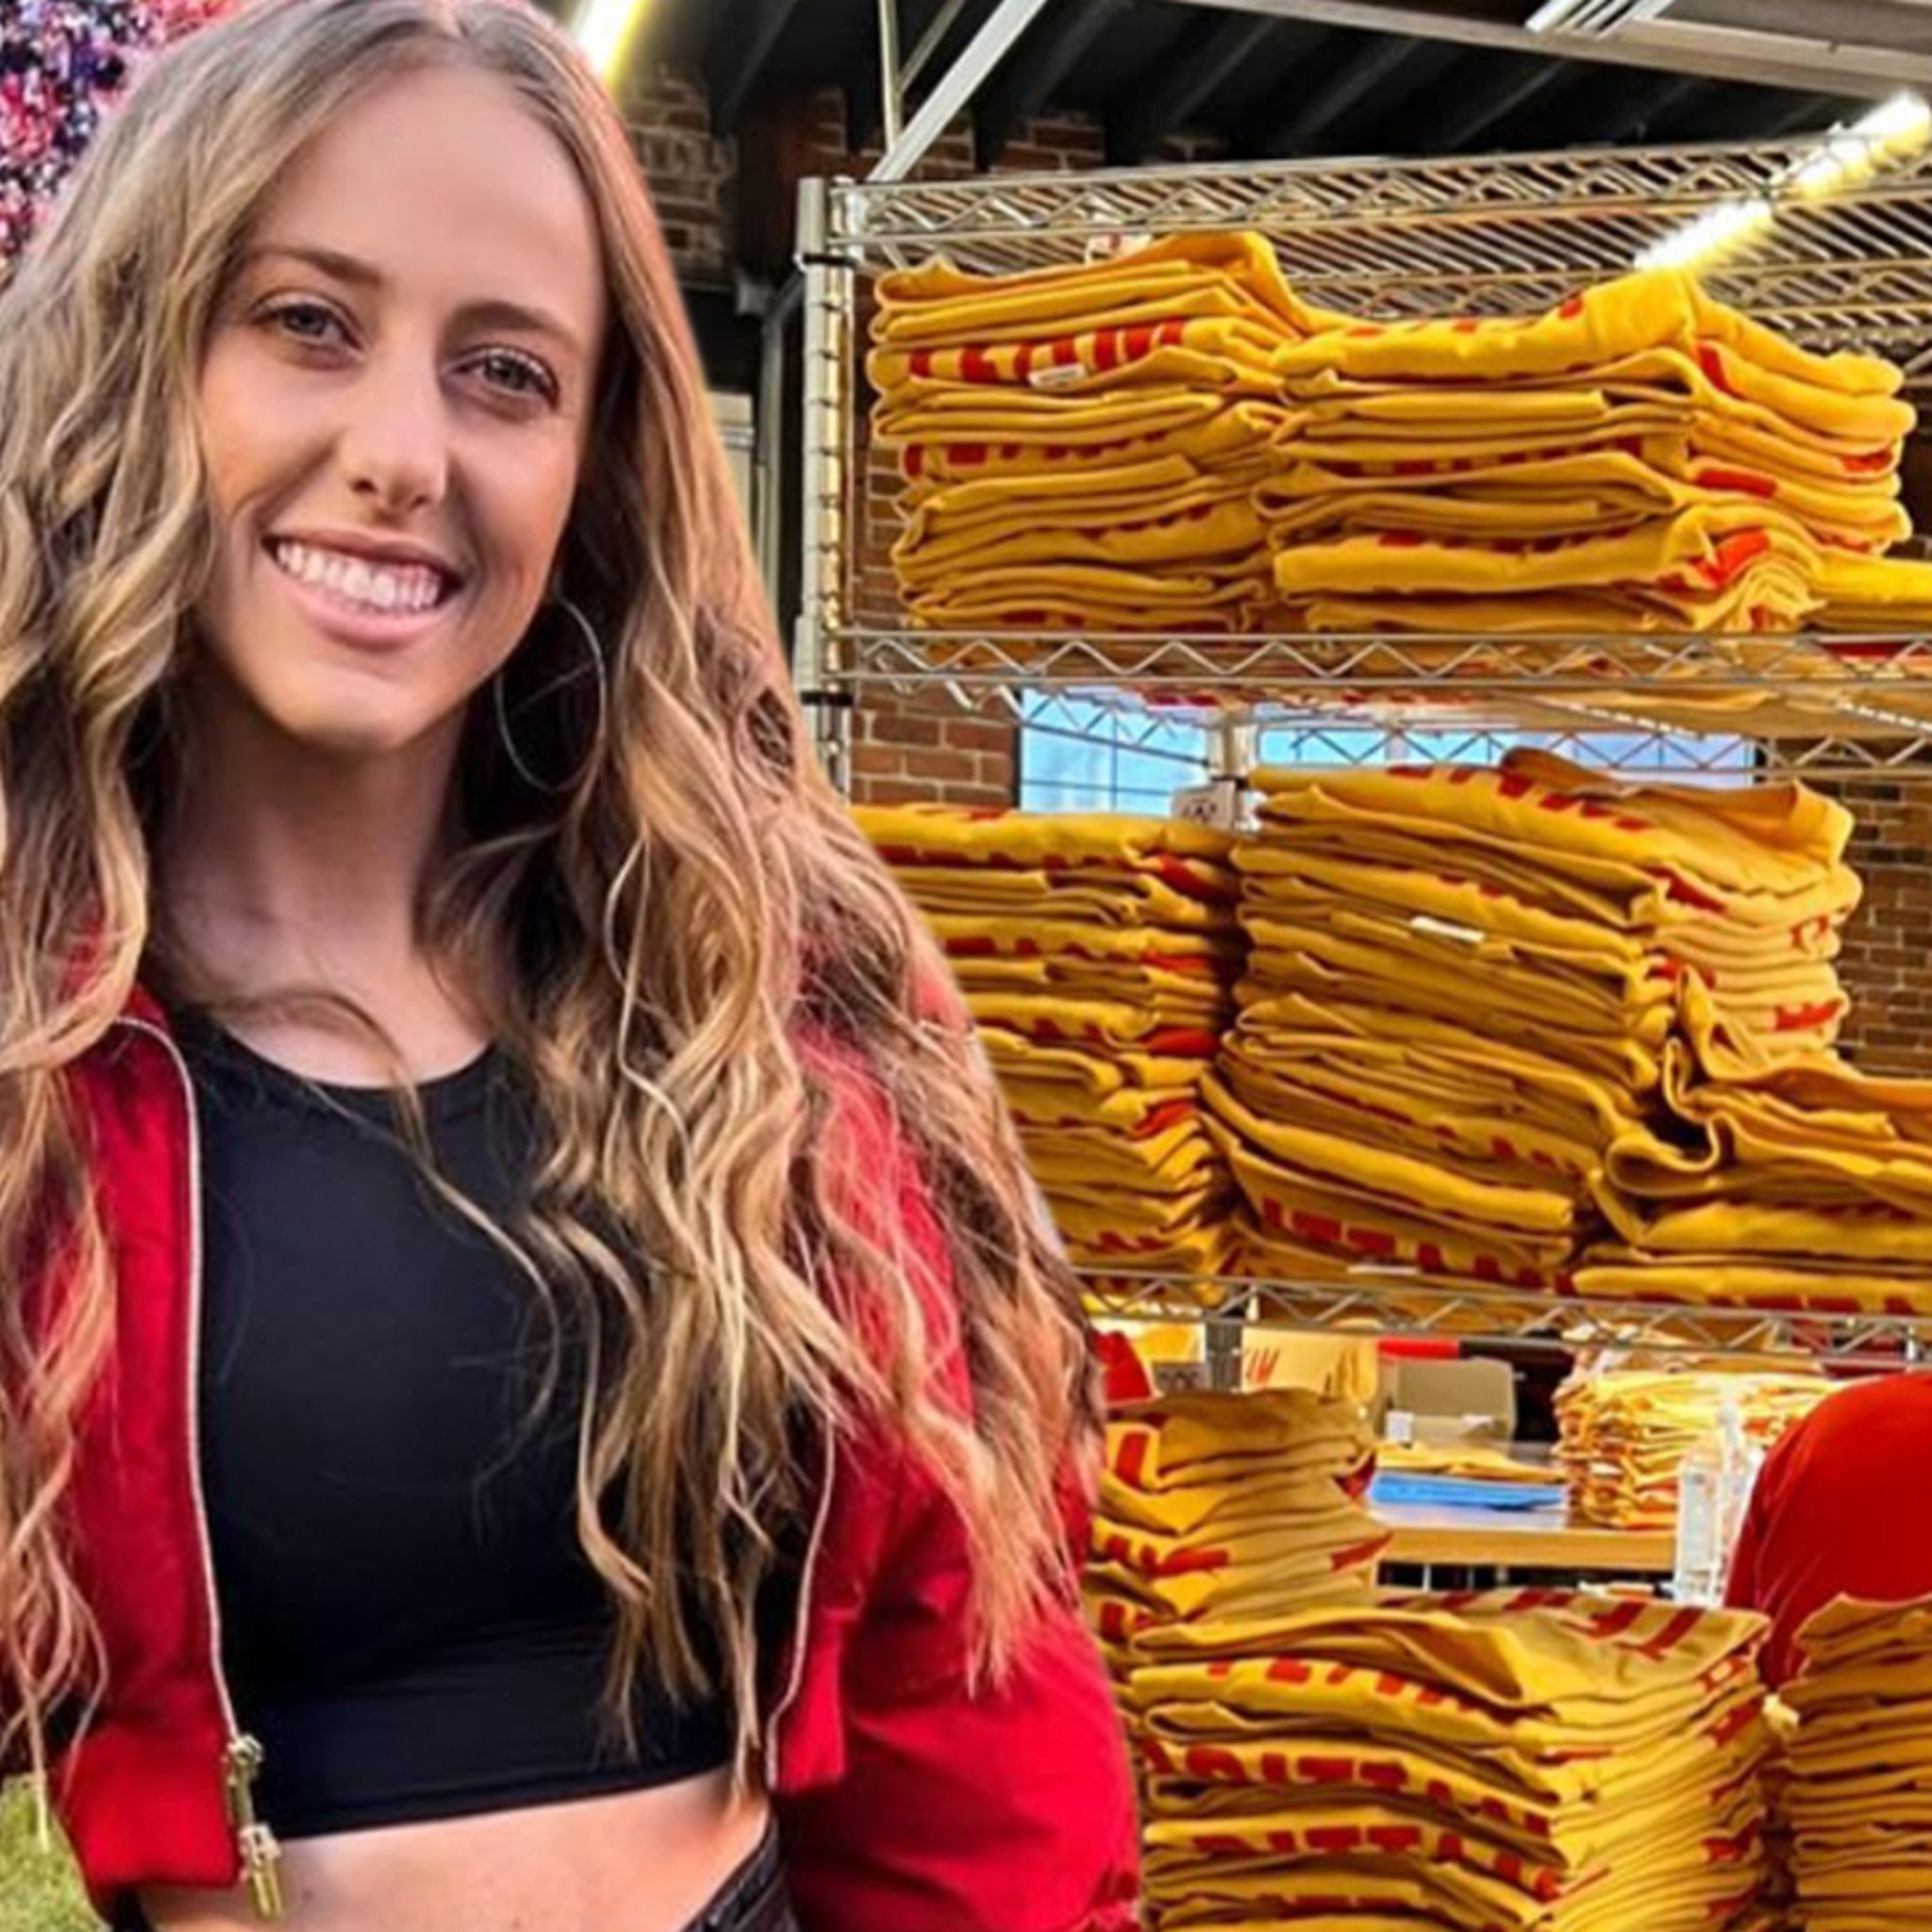 Patrick Mahomes Fiancée's 'Team Brittany' Shirts Flying Off